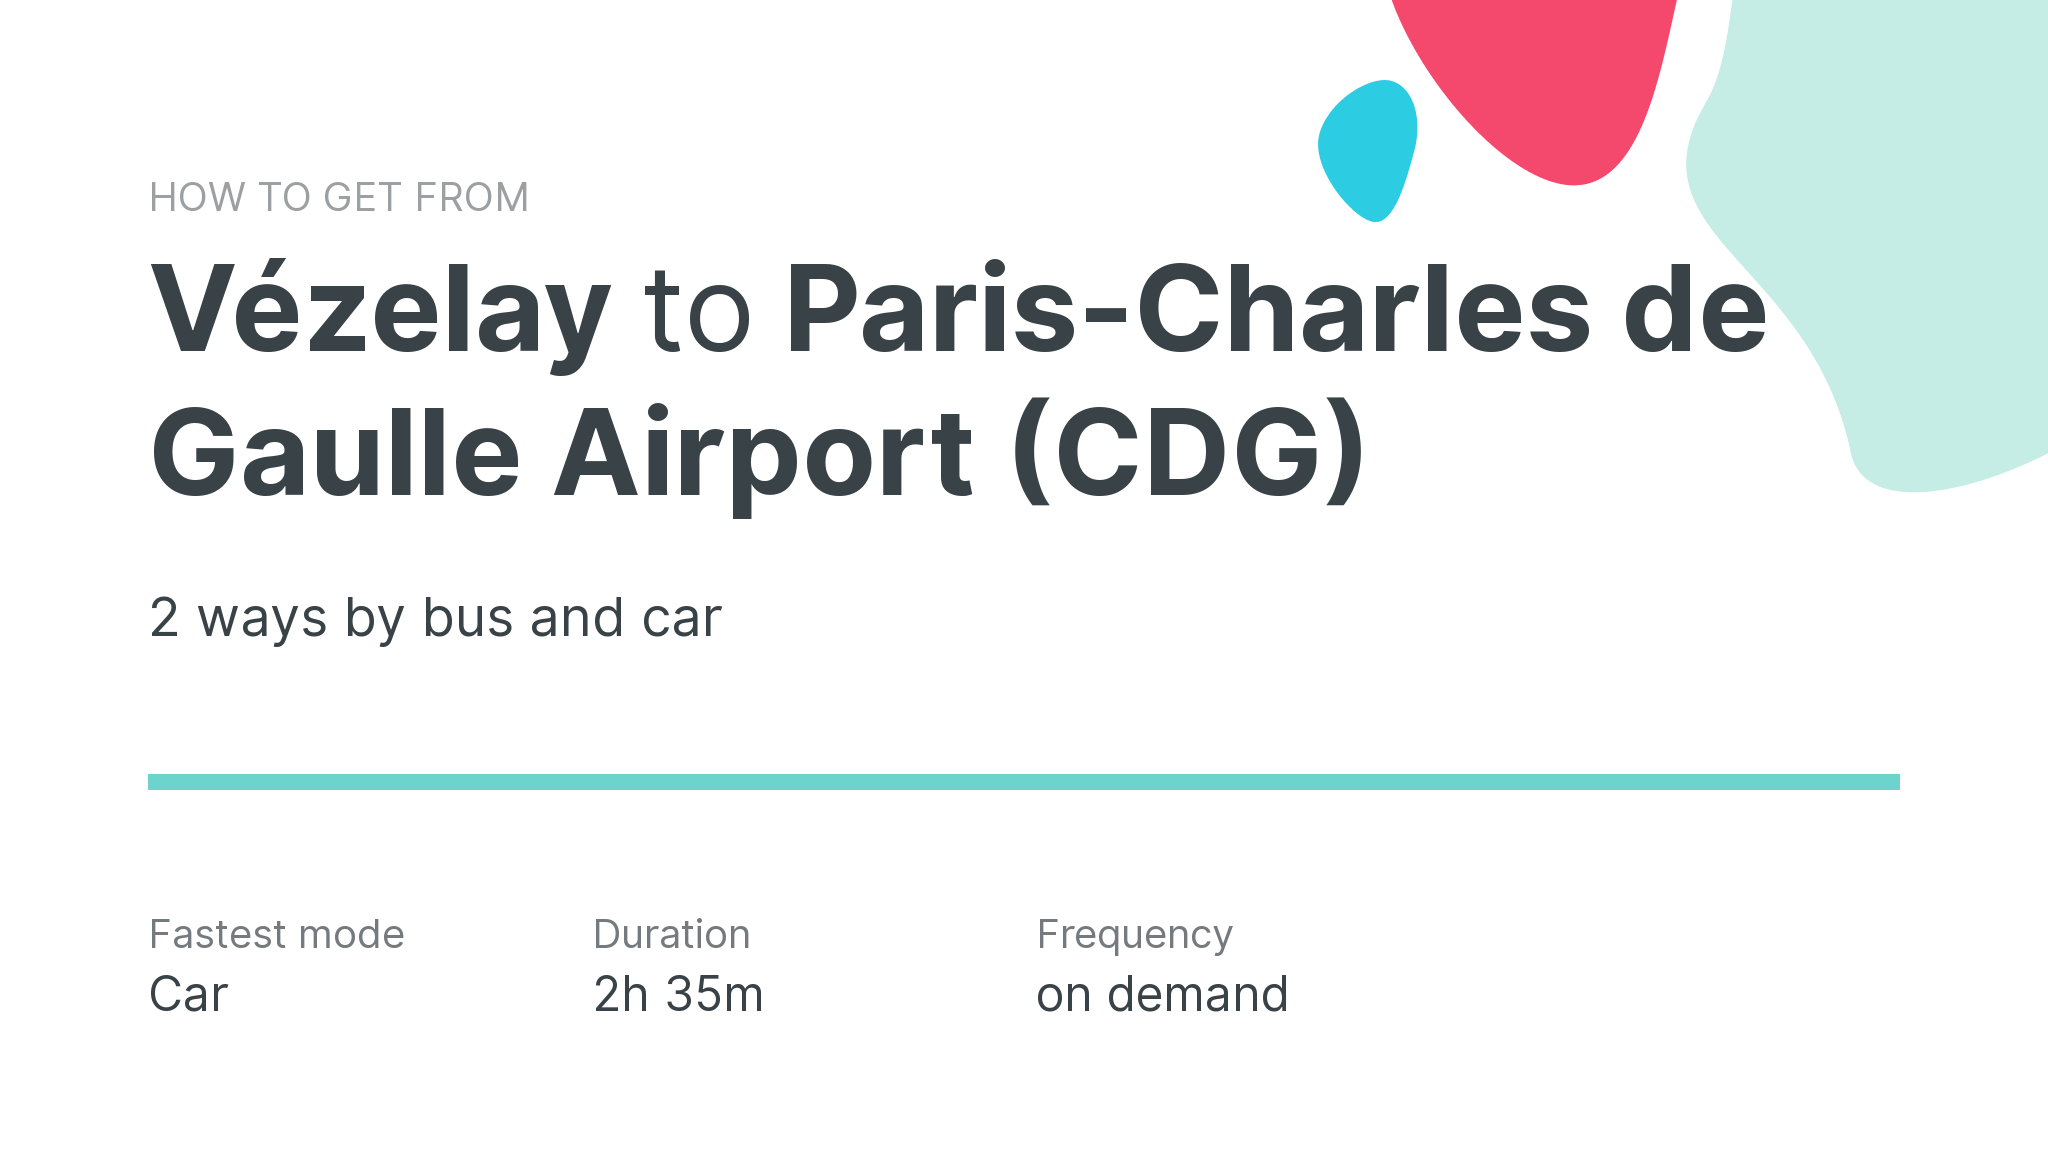 How do I get from Vézelay to Paris-Charles de Gaulle Airport (CDG)